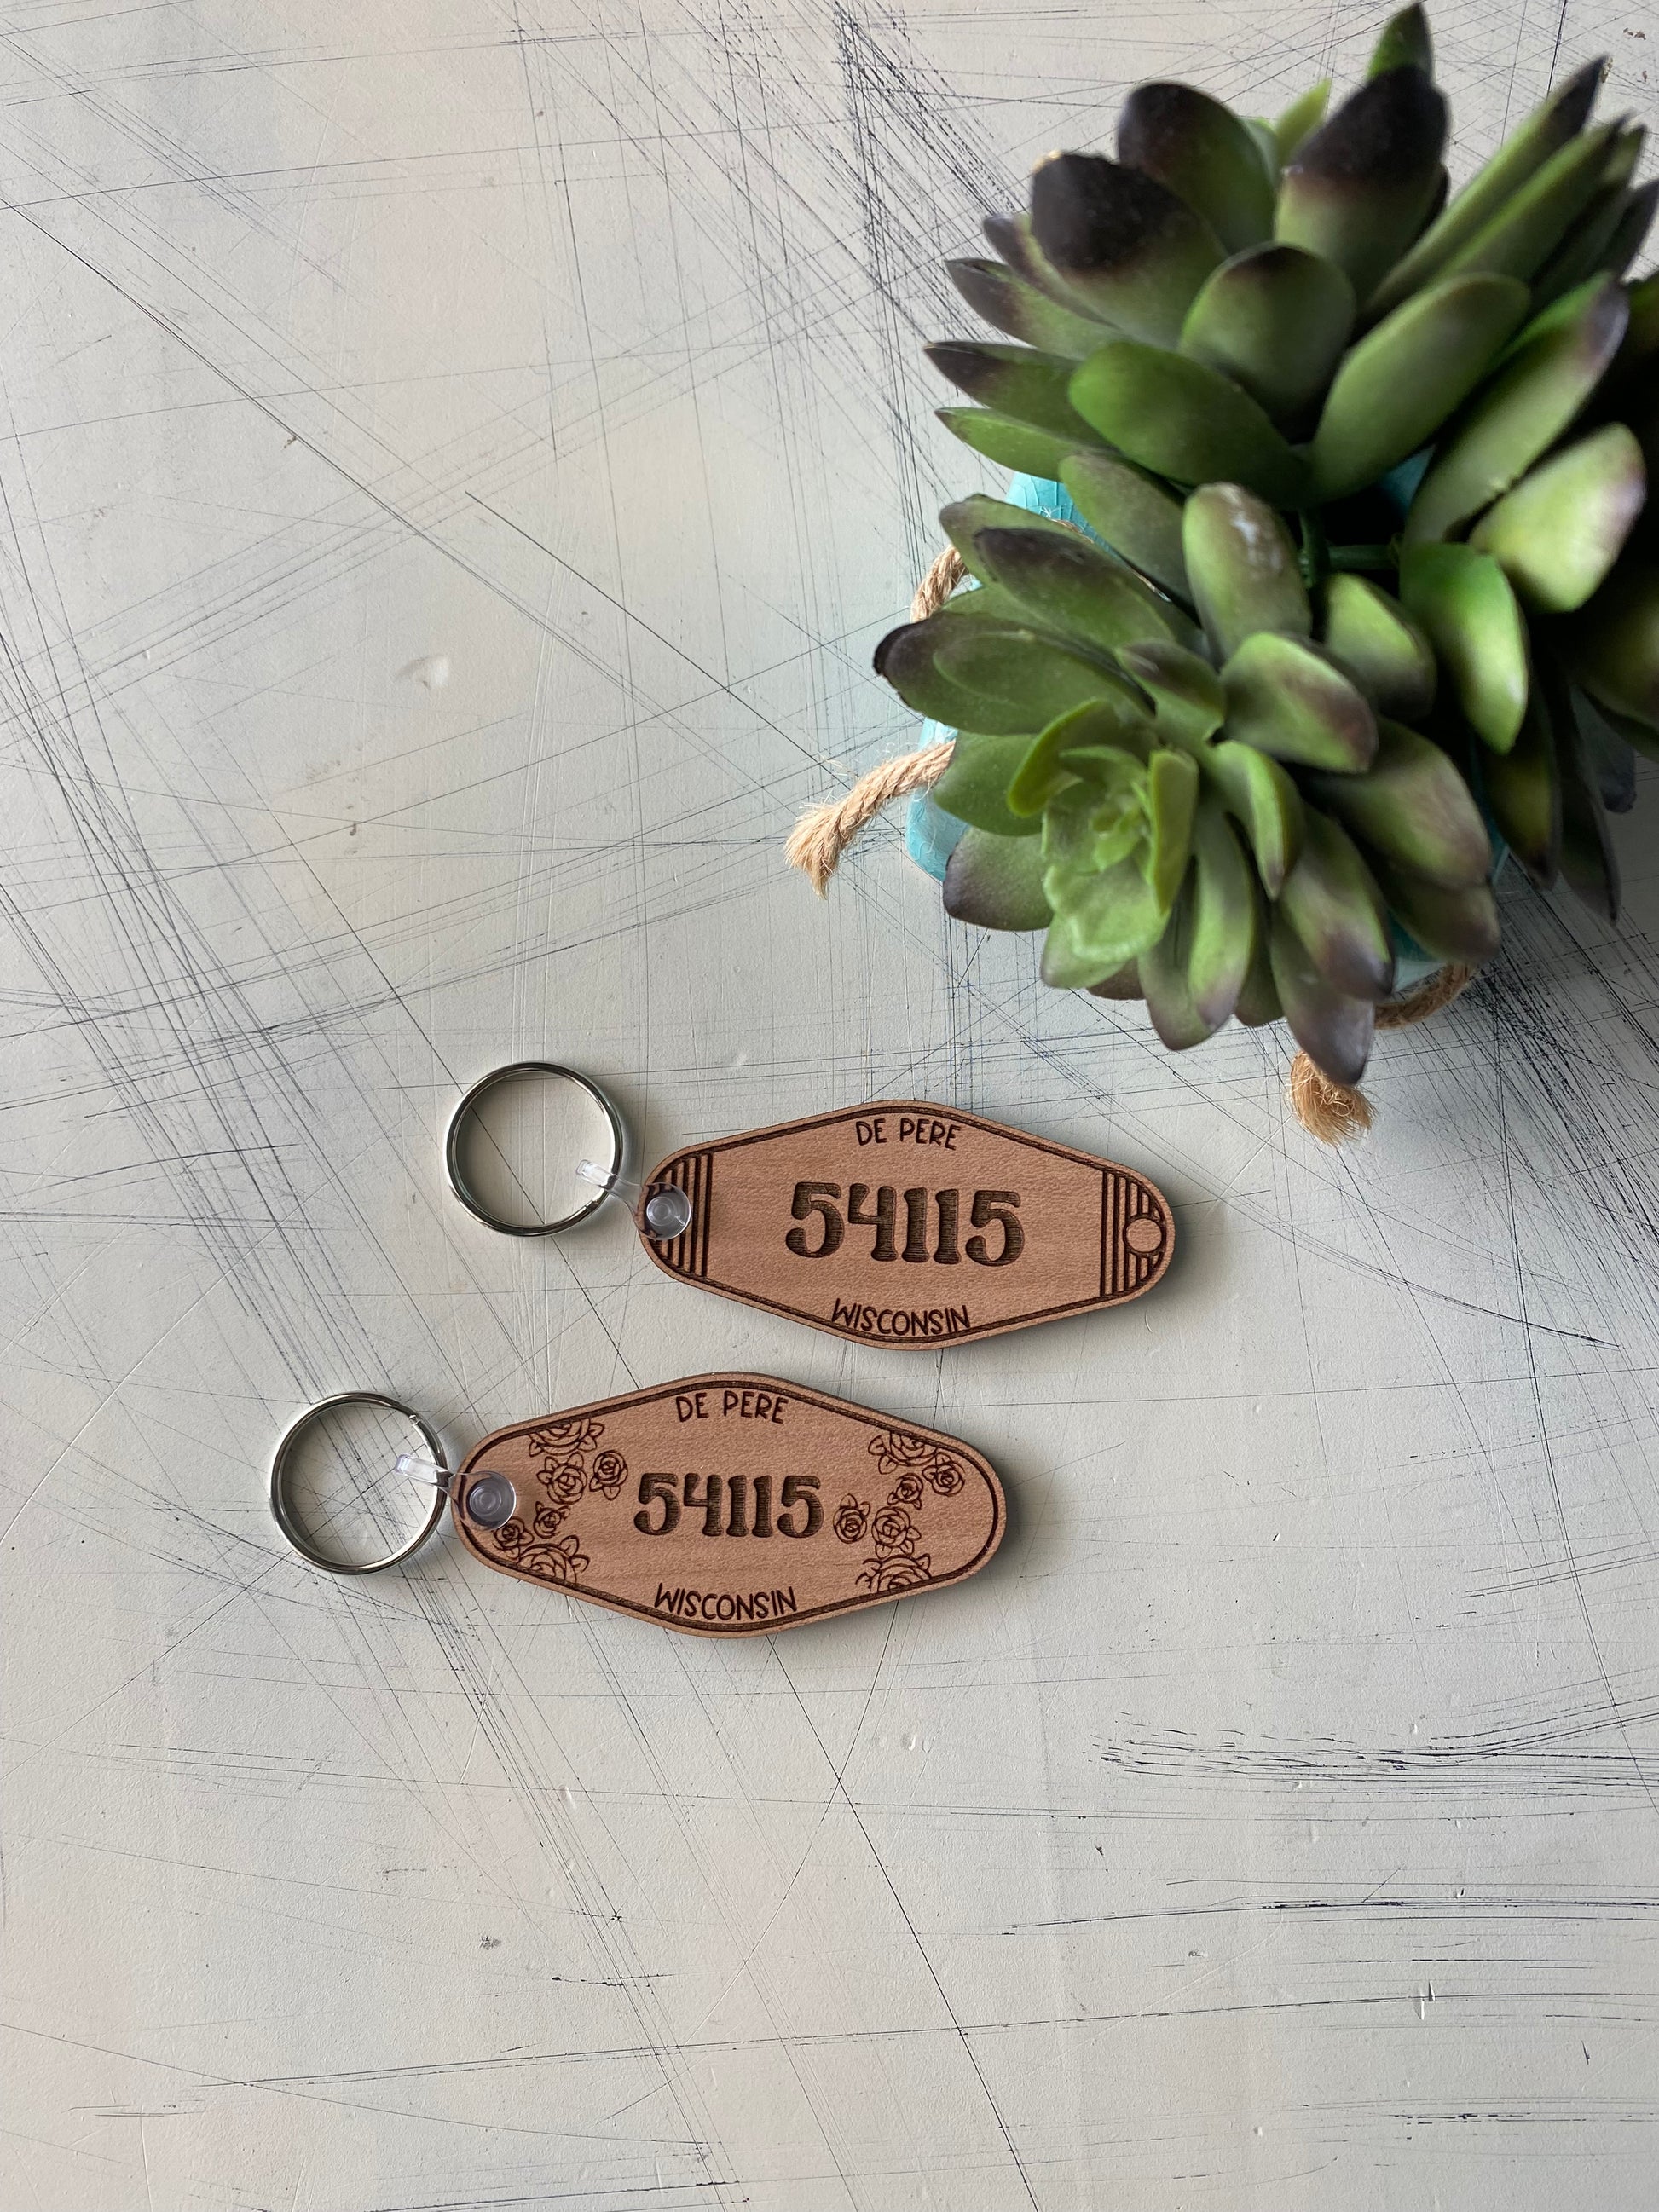 Zip code and city wood motel-style keychains - Novotny Designs - floral or lined - customizable